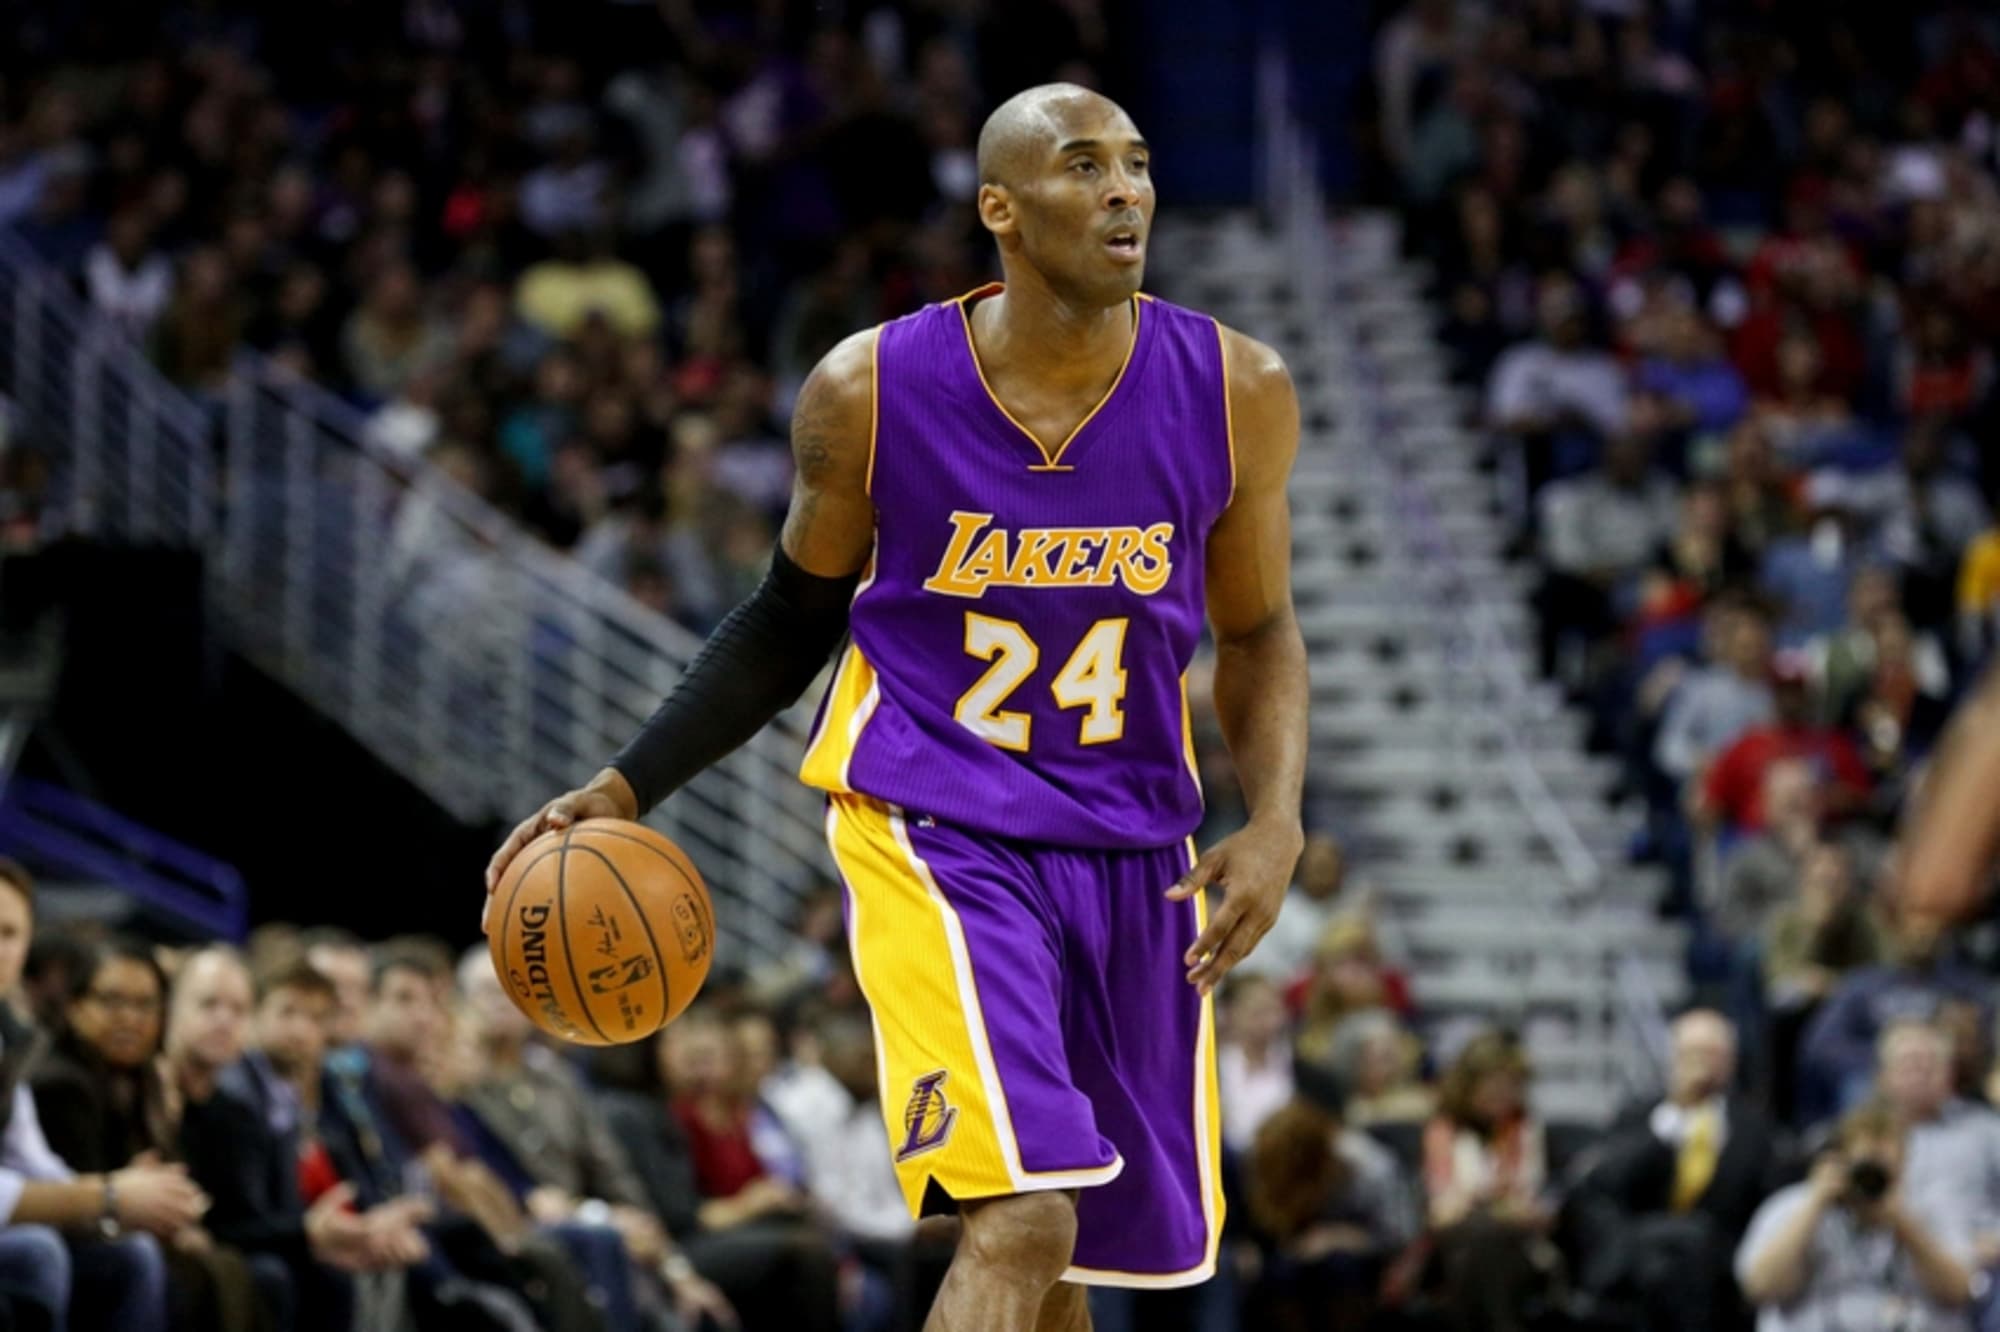 Lakers' Kobe Bryant gets new contract, but can he get another ring